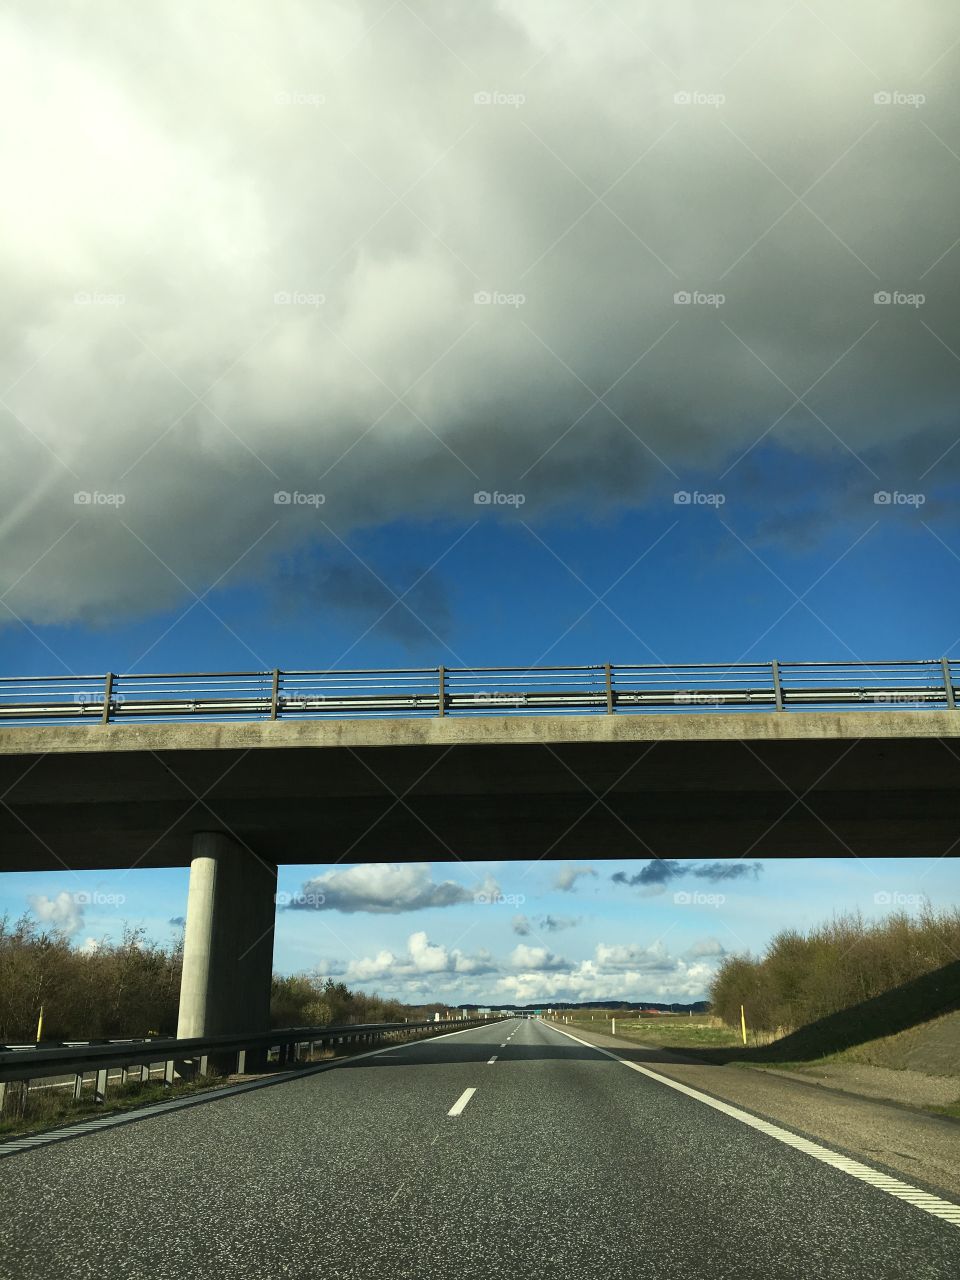 Driving under the bridge. Grey clouds hanging low.